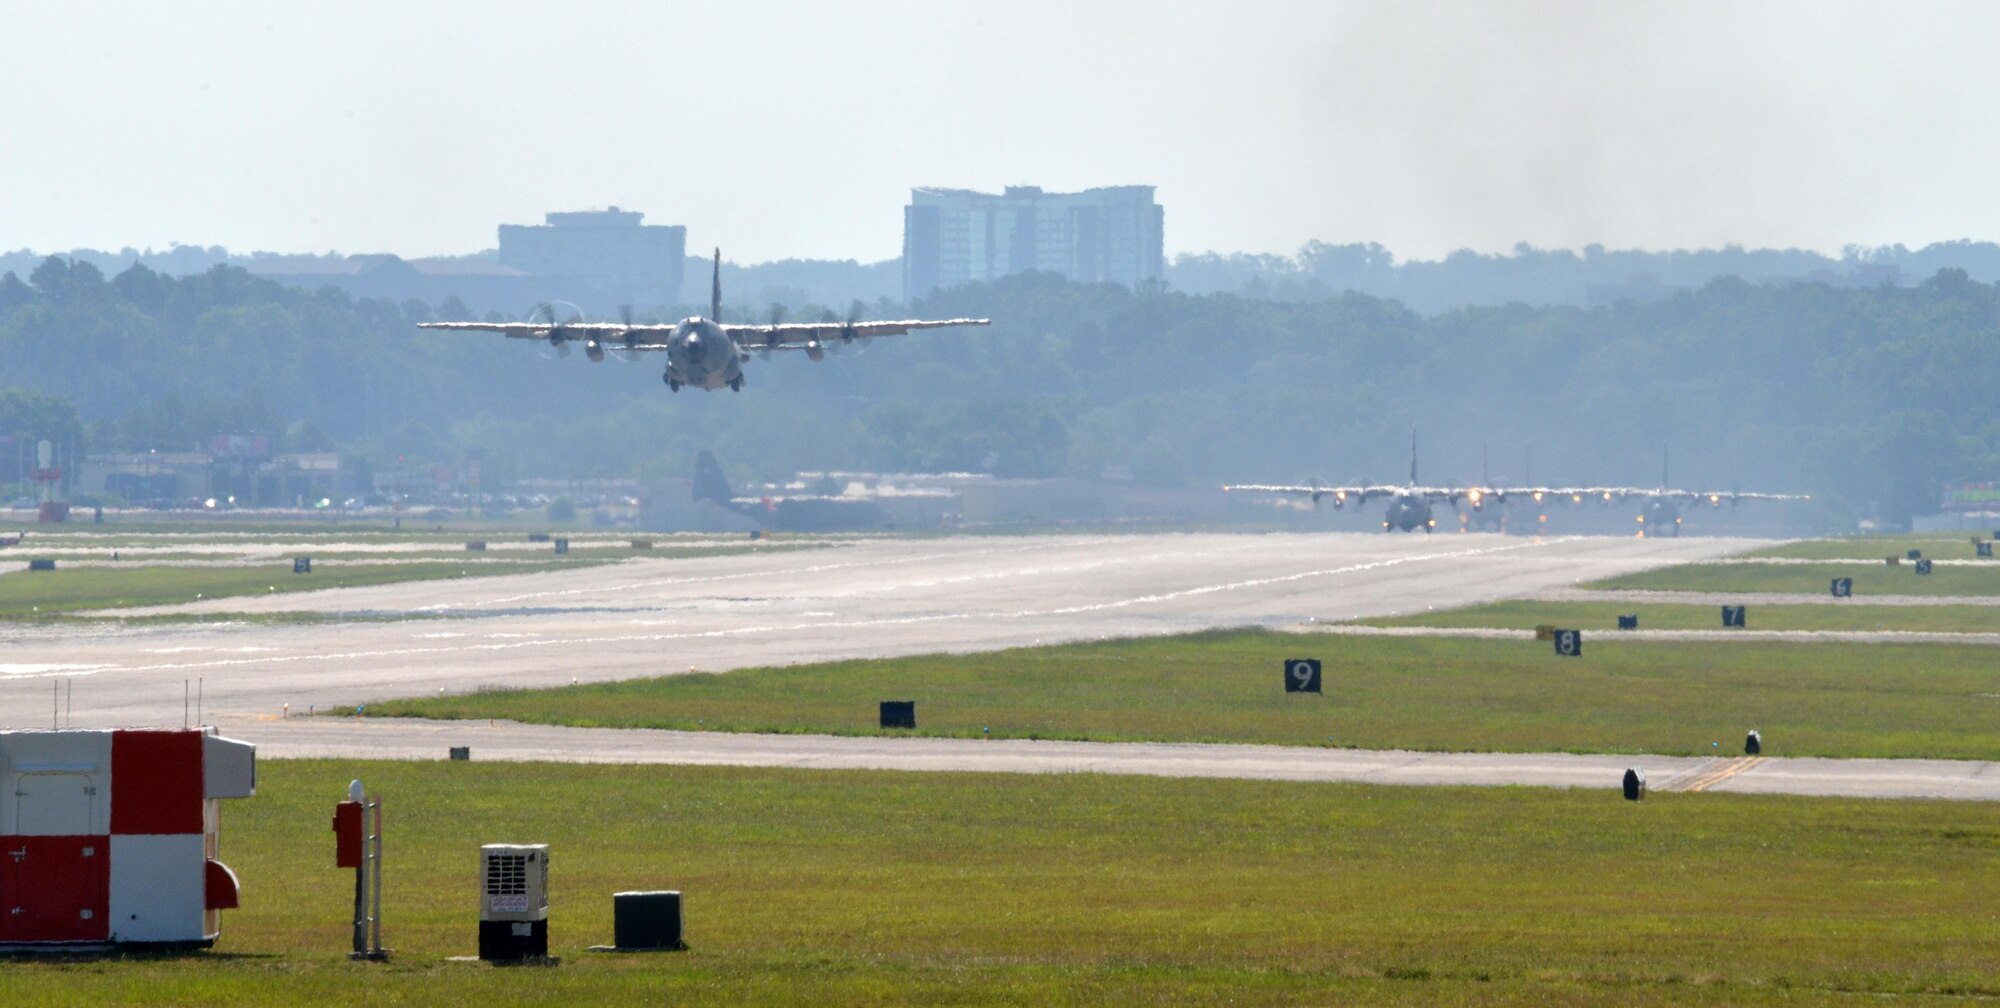 A formation of C-130 Hercules from the 700th Airlift Squadron take off from the flightline of Dobbins Air Reserve Base, Ga., on July 9, 2016. The 94th Airlift Wing formation conducted proficiency training missions over downtown Atlanta and much of the metro area. (U.S. Air Force photo/Tech. Sgt. Kelly Goonan)